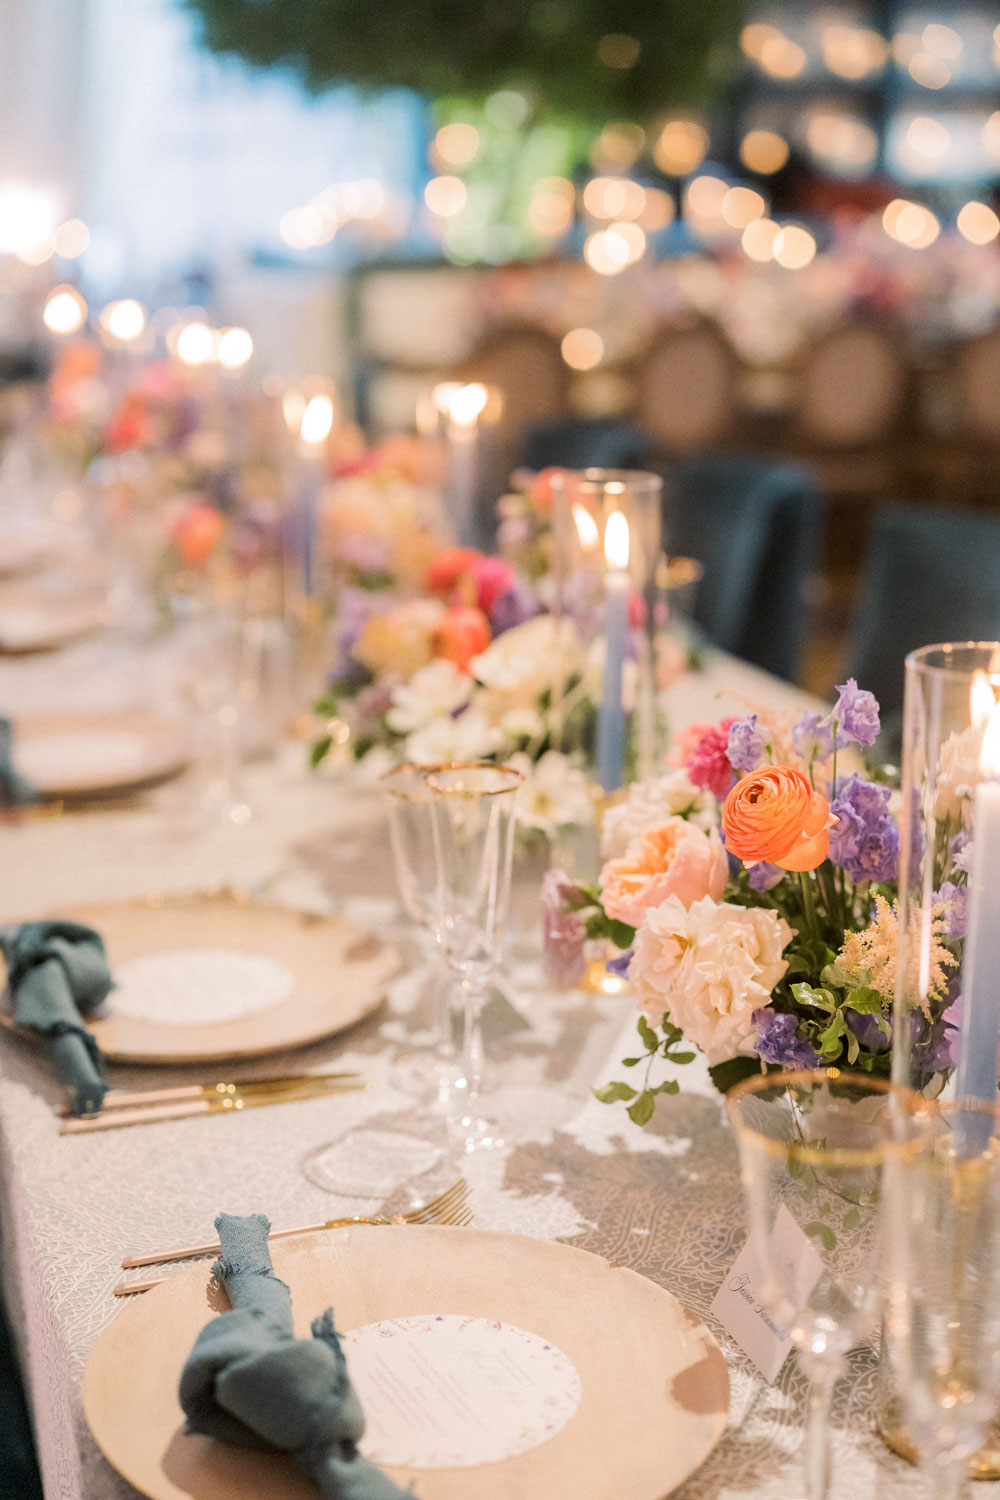 The most beautiful wedding reception with vivid floral arrangements and blue tapered candles.